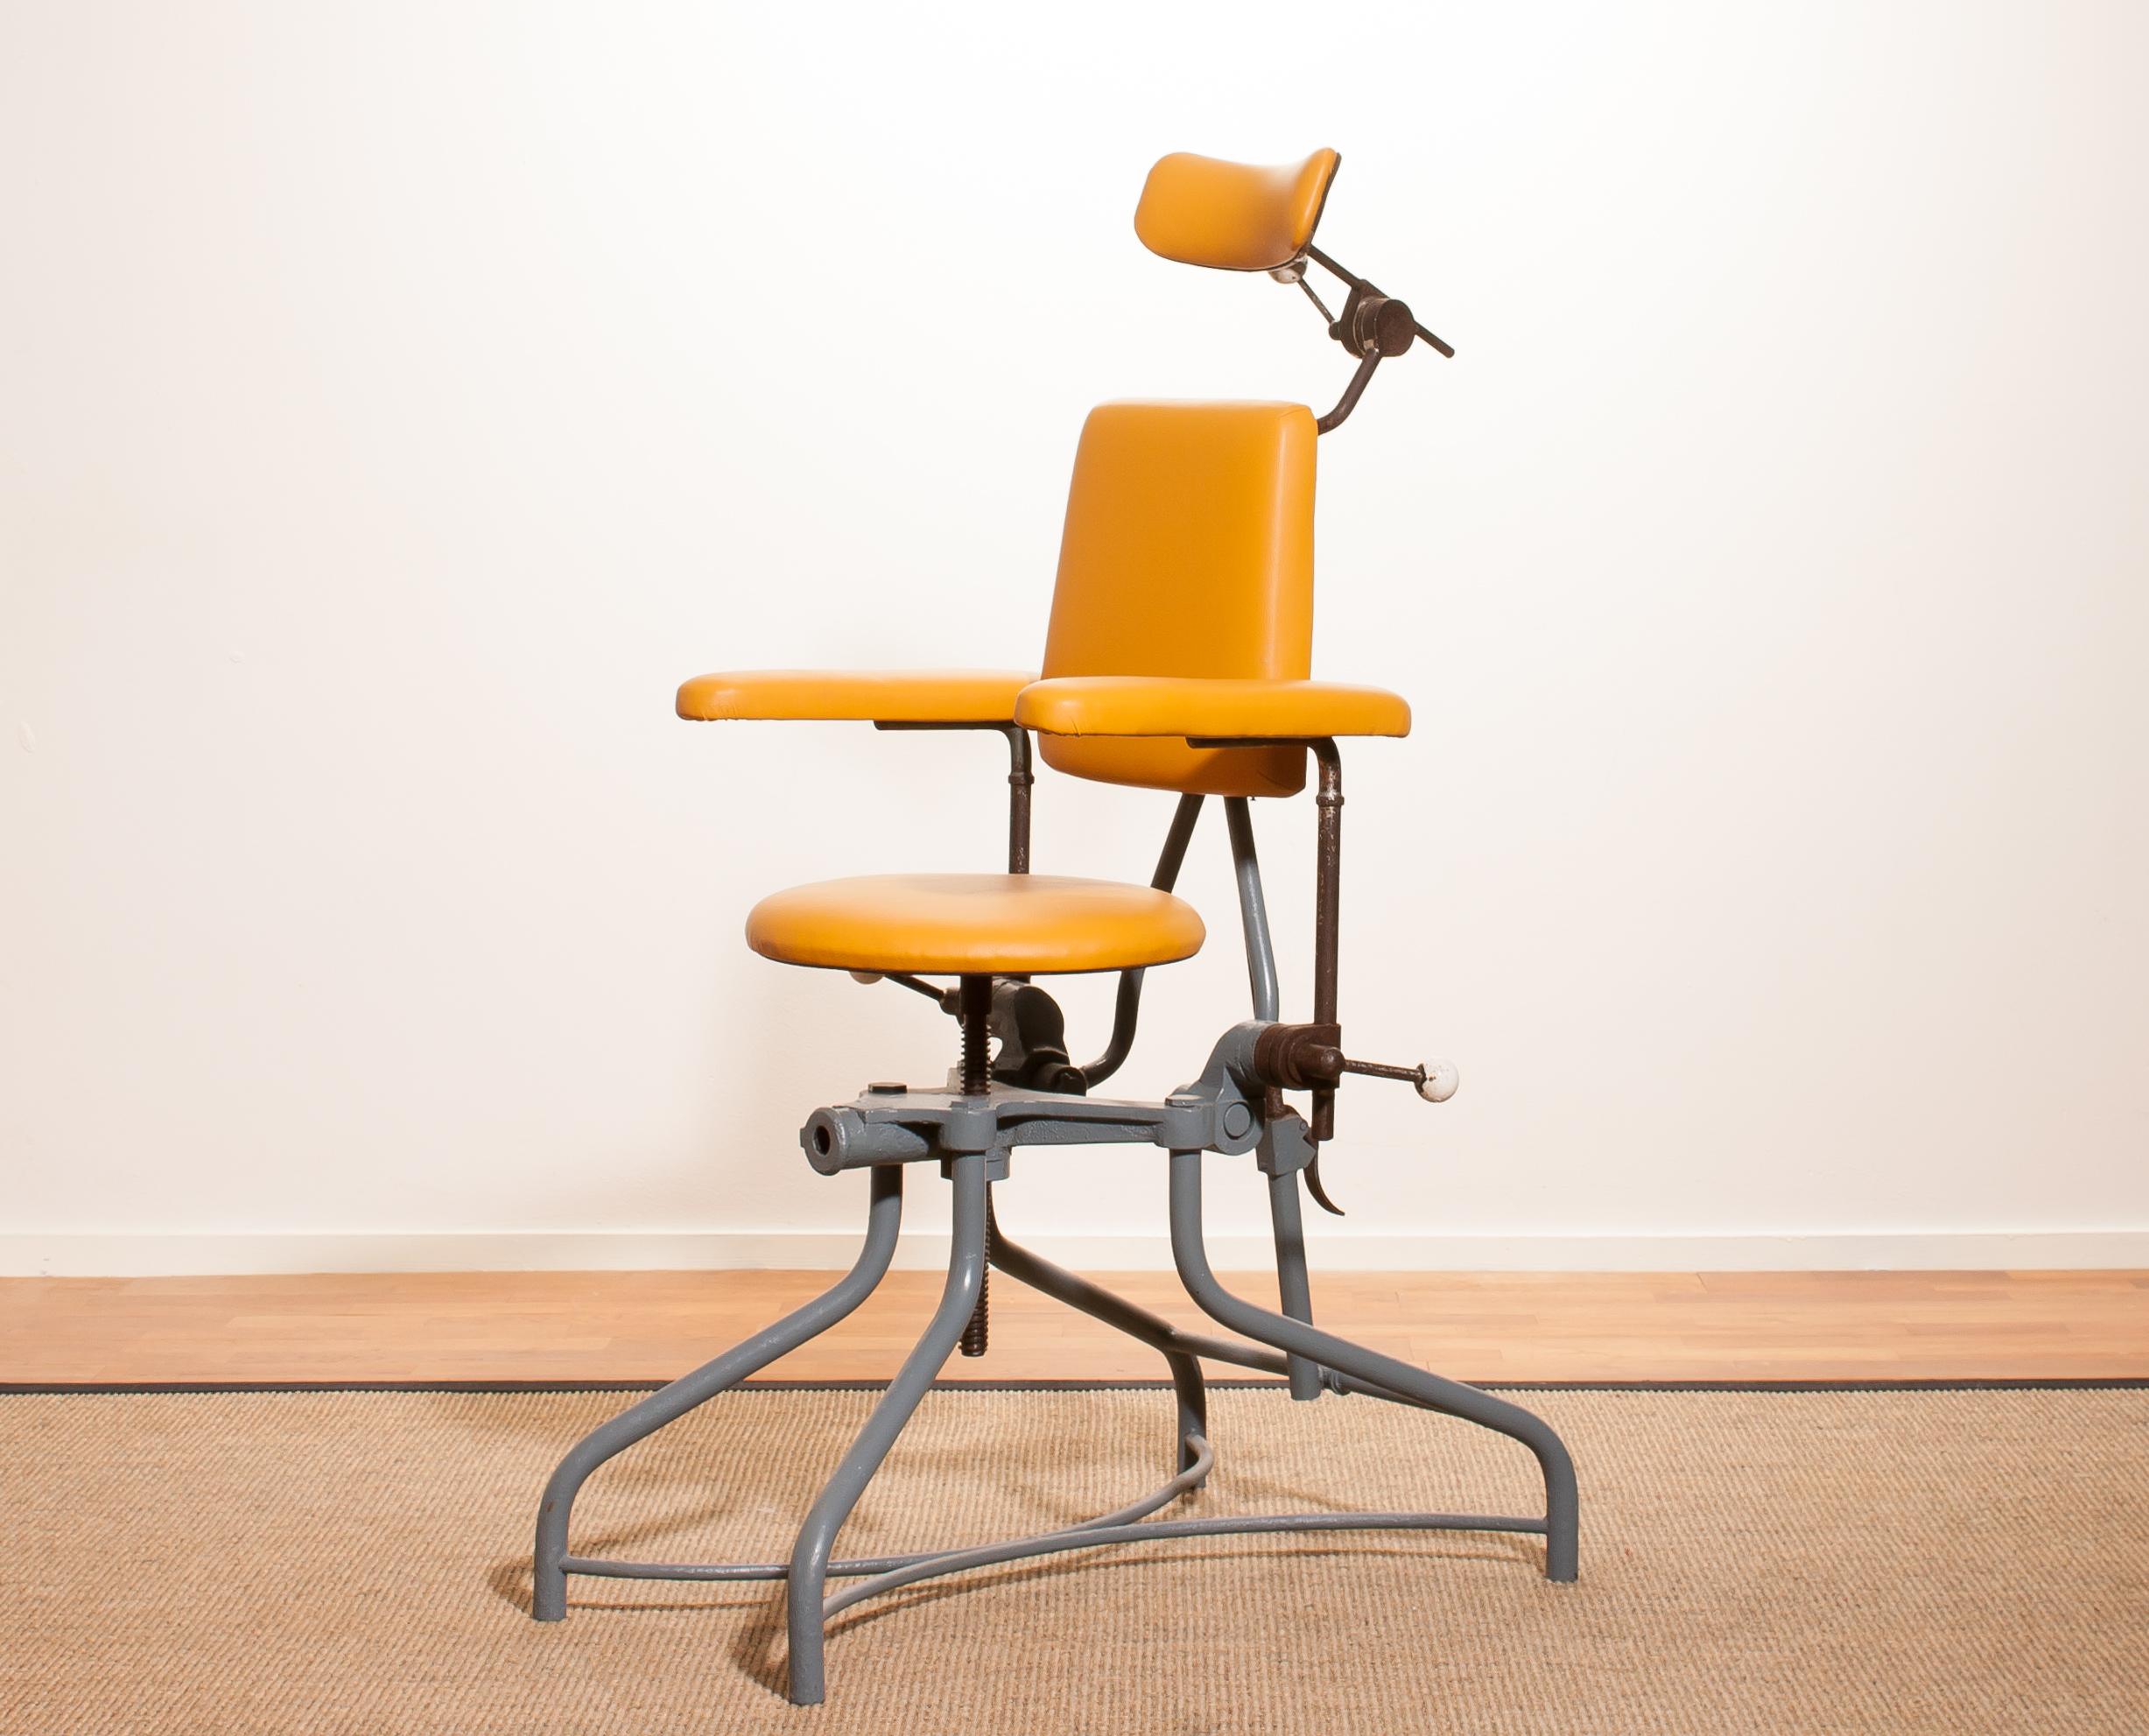 Very nice medical or dentist chair.
The frame is made of grey-blue lacquered steel with a new yellow leatherette seating and neck rest.
The seating and neck rest are adjustable in height.
Some steel parts are rusty what is normal for its